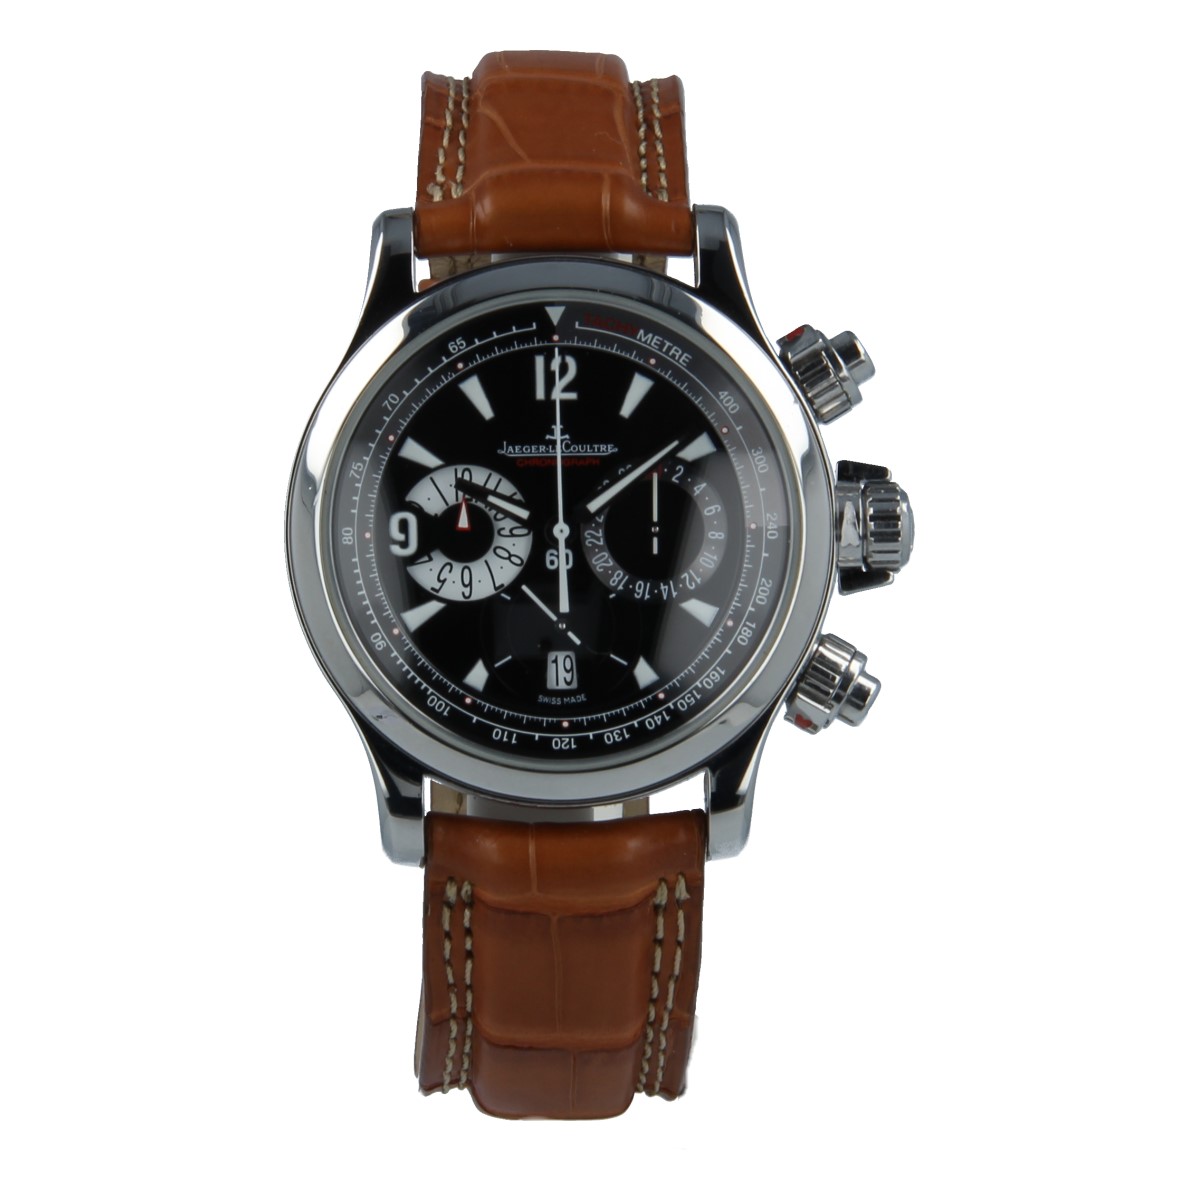 Jaeger-LeCoultre Master Compressor Chronograph | Buy pre-owned Jaeger-LeCoultre watch